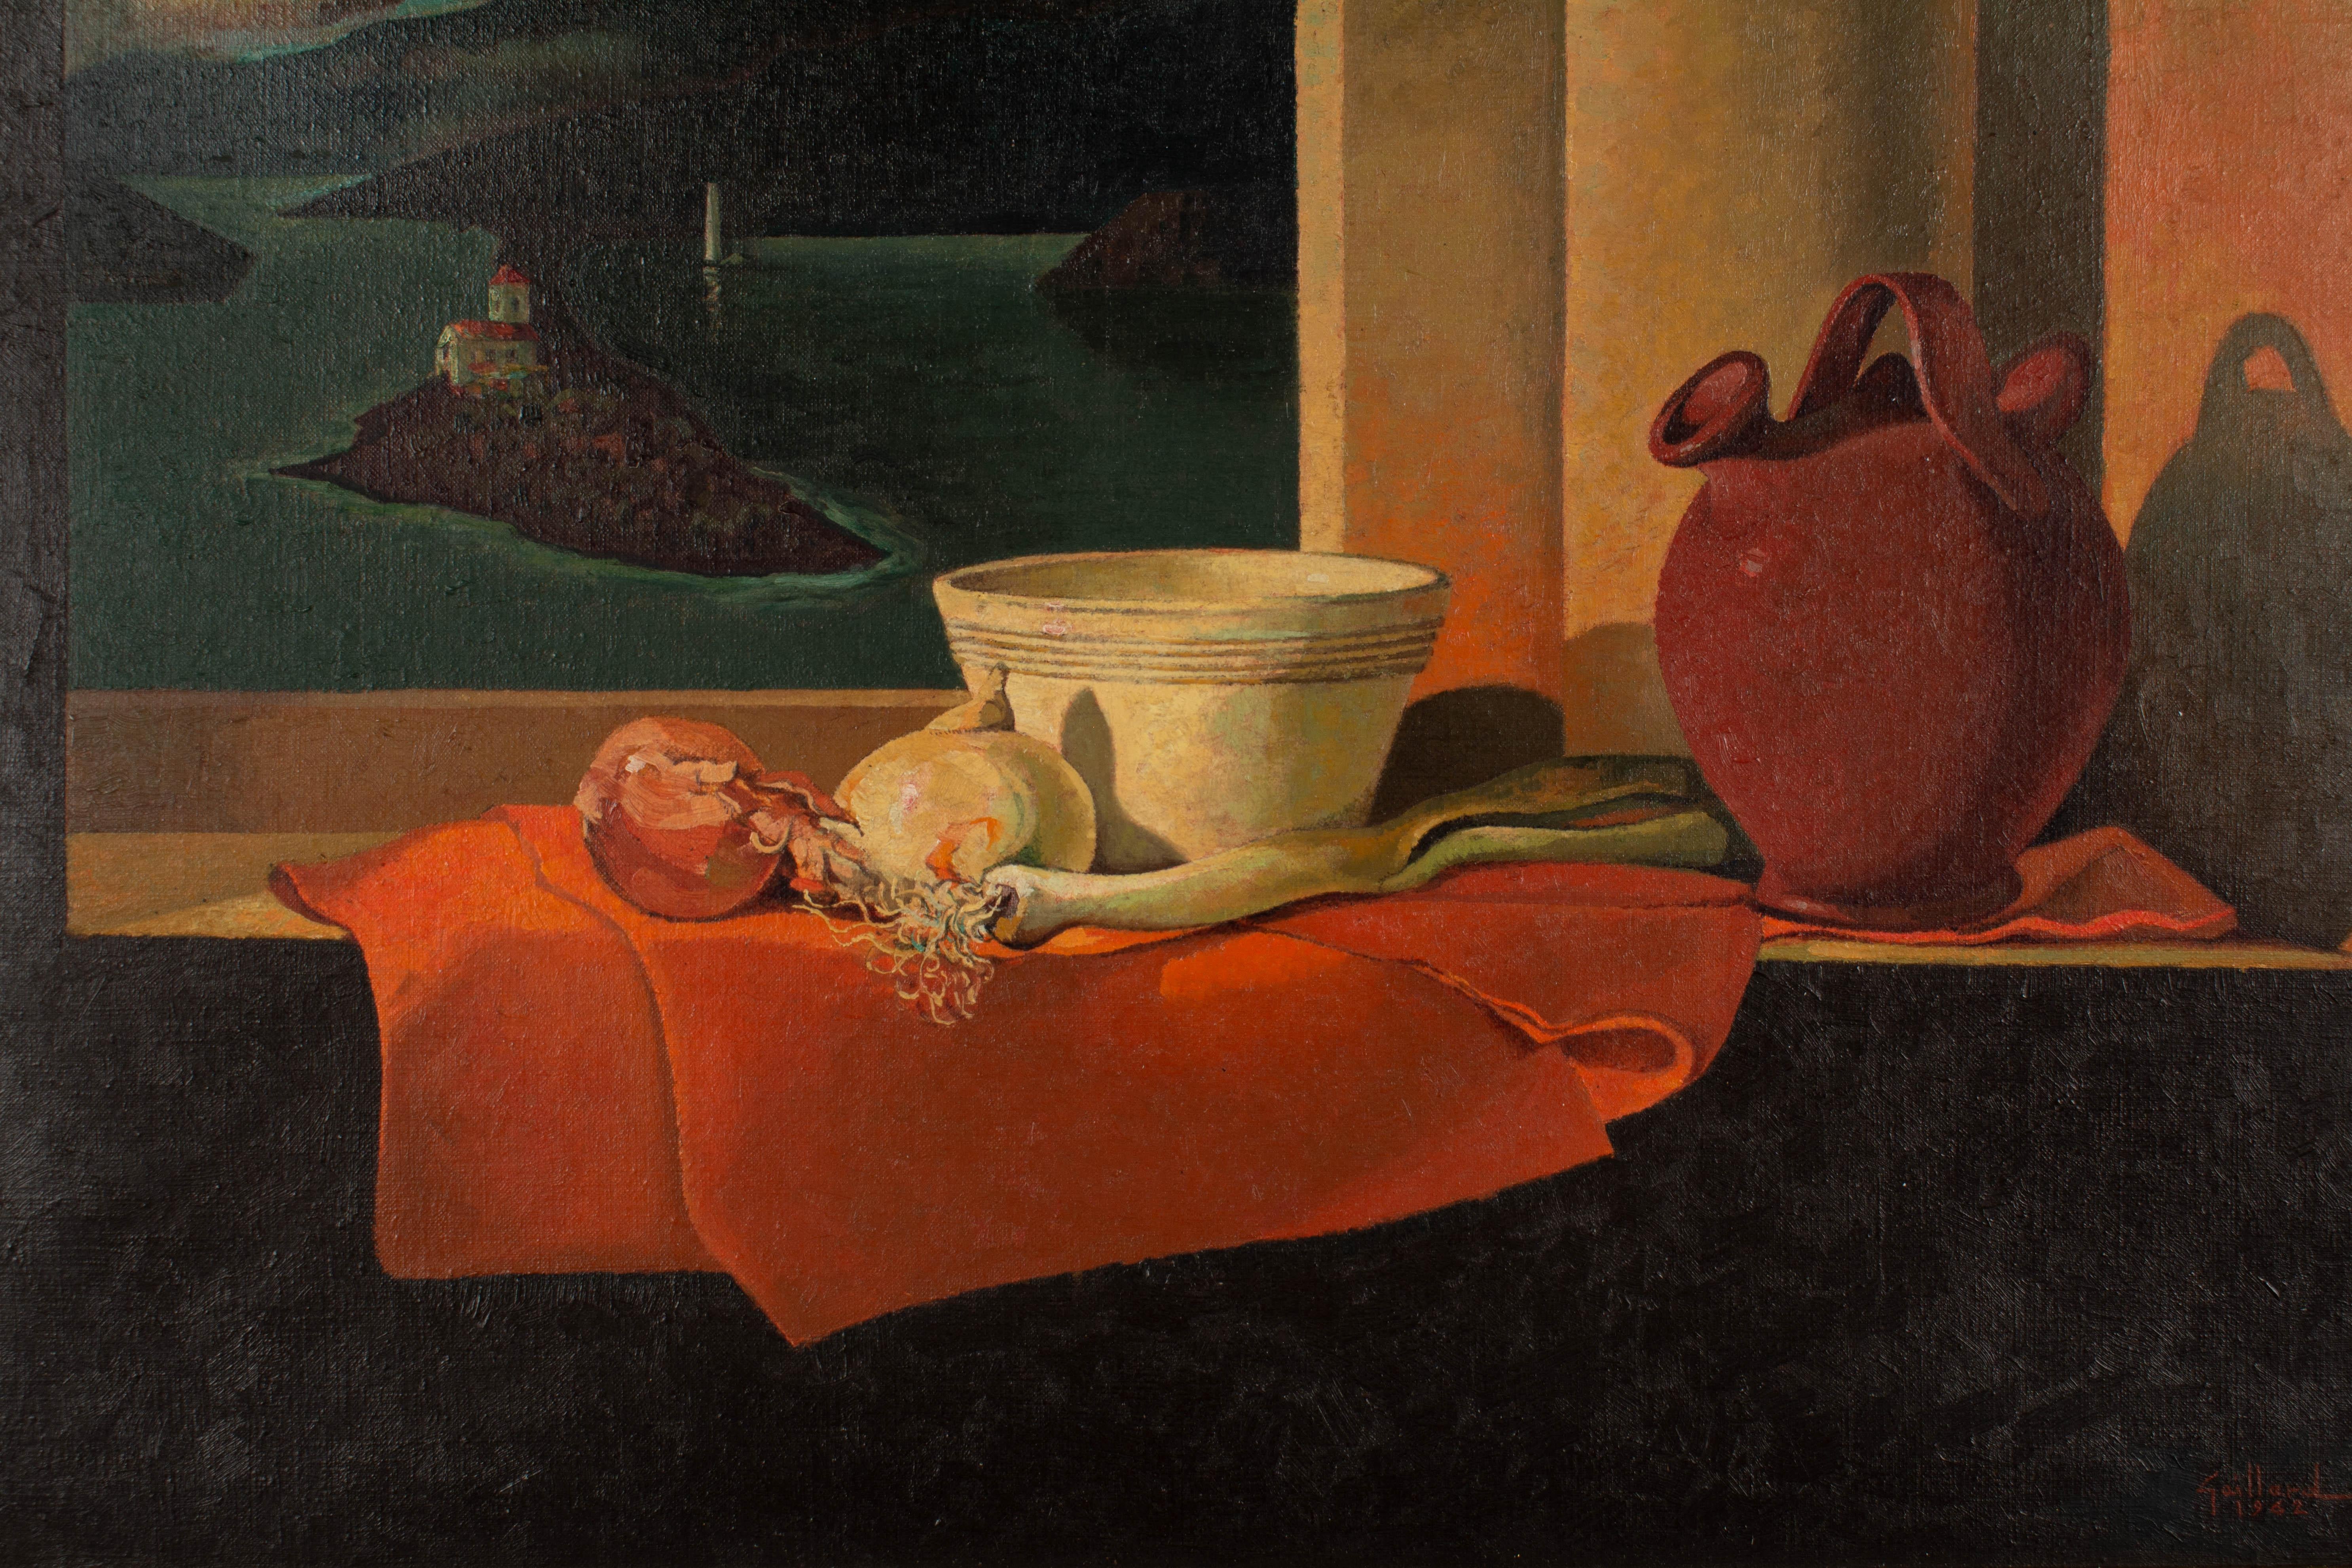 Untitled still life painting by French Realist artist Hubert Gaillard (1912-2003). Oil on canvas. Signed and dated lower right: Gaillard, 1962. Original frame shows light wear.
A richly colored still life depicting dramatically lit objects on a